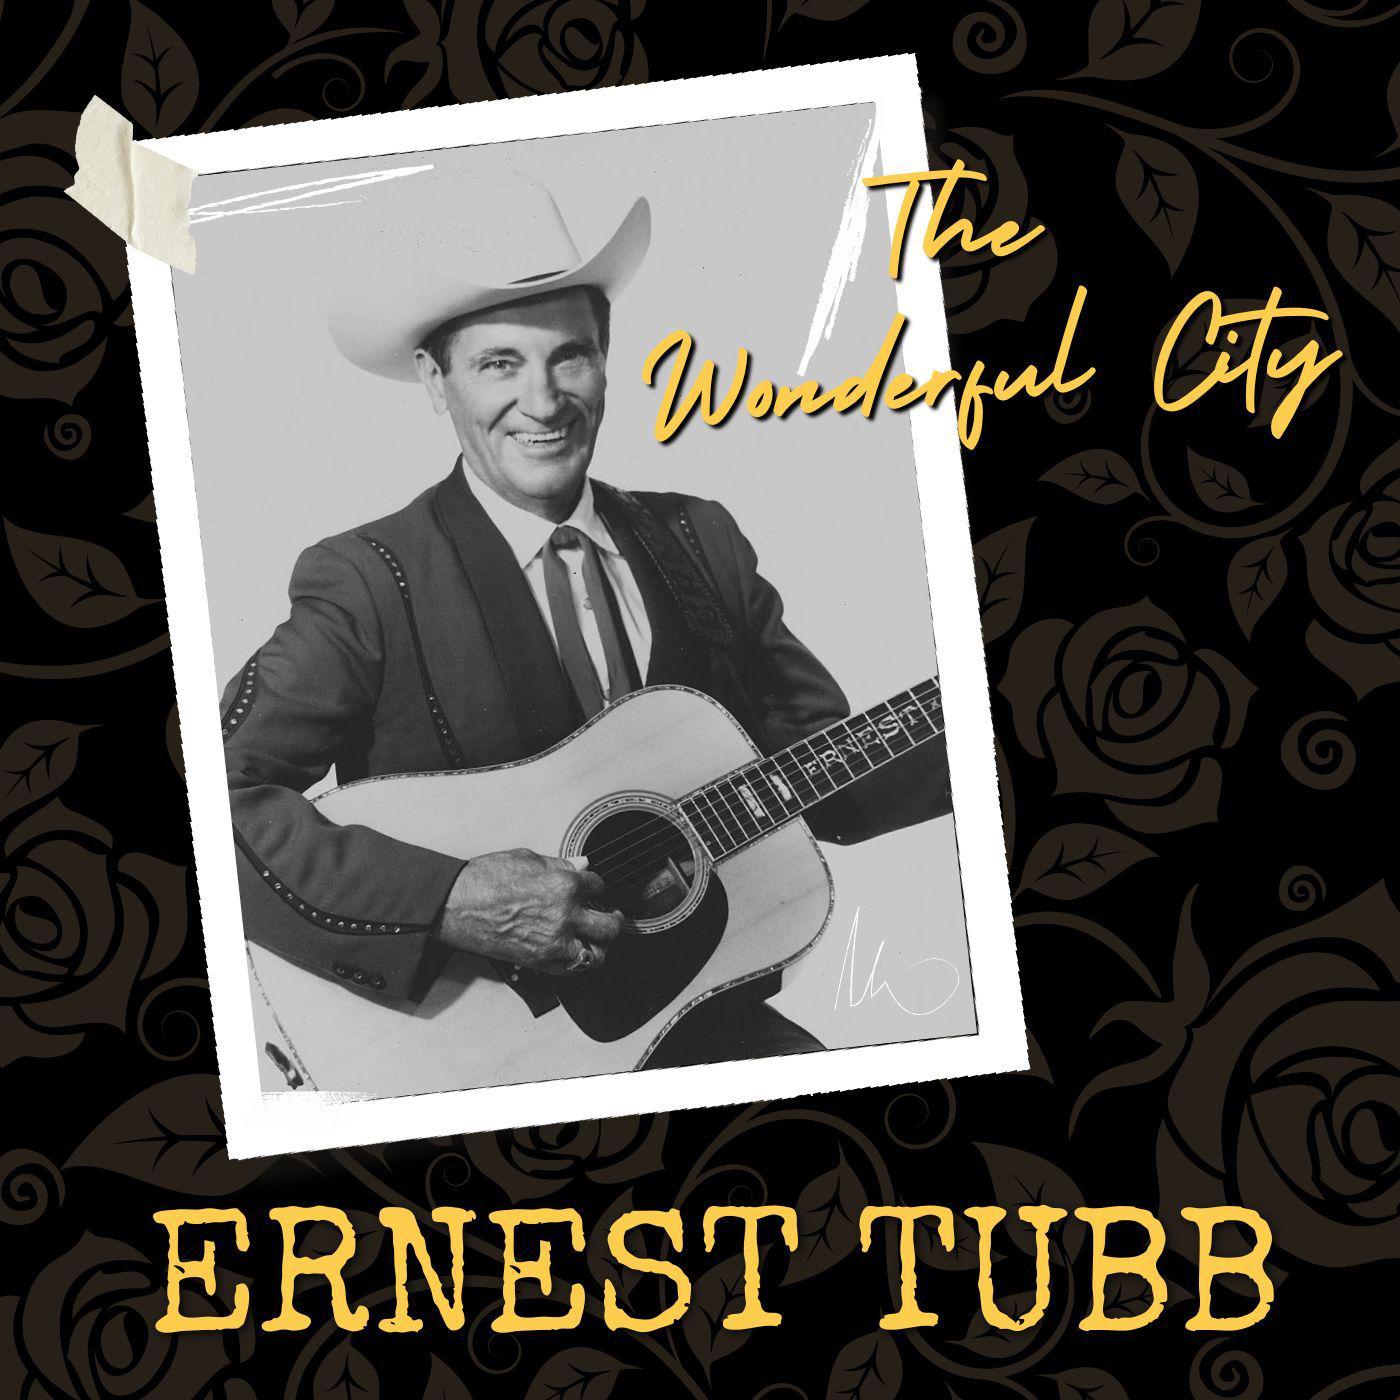 Ernest Tubb - What A Friend We Have In Jesus